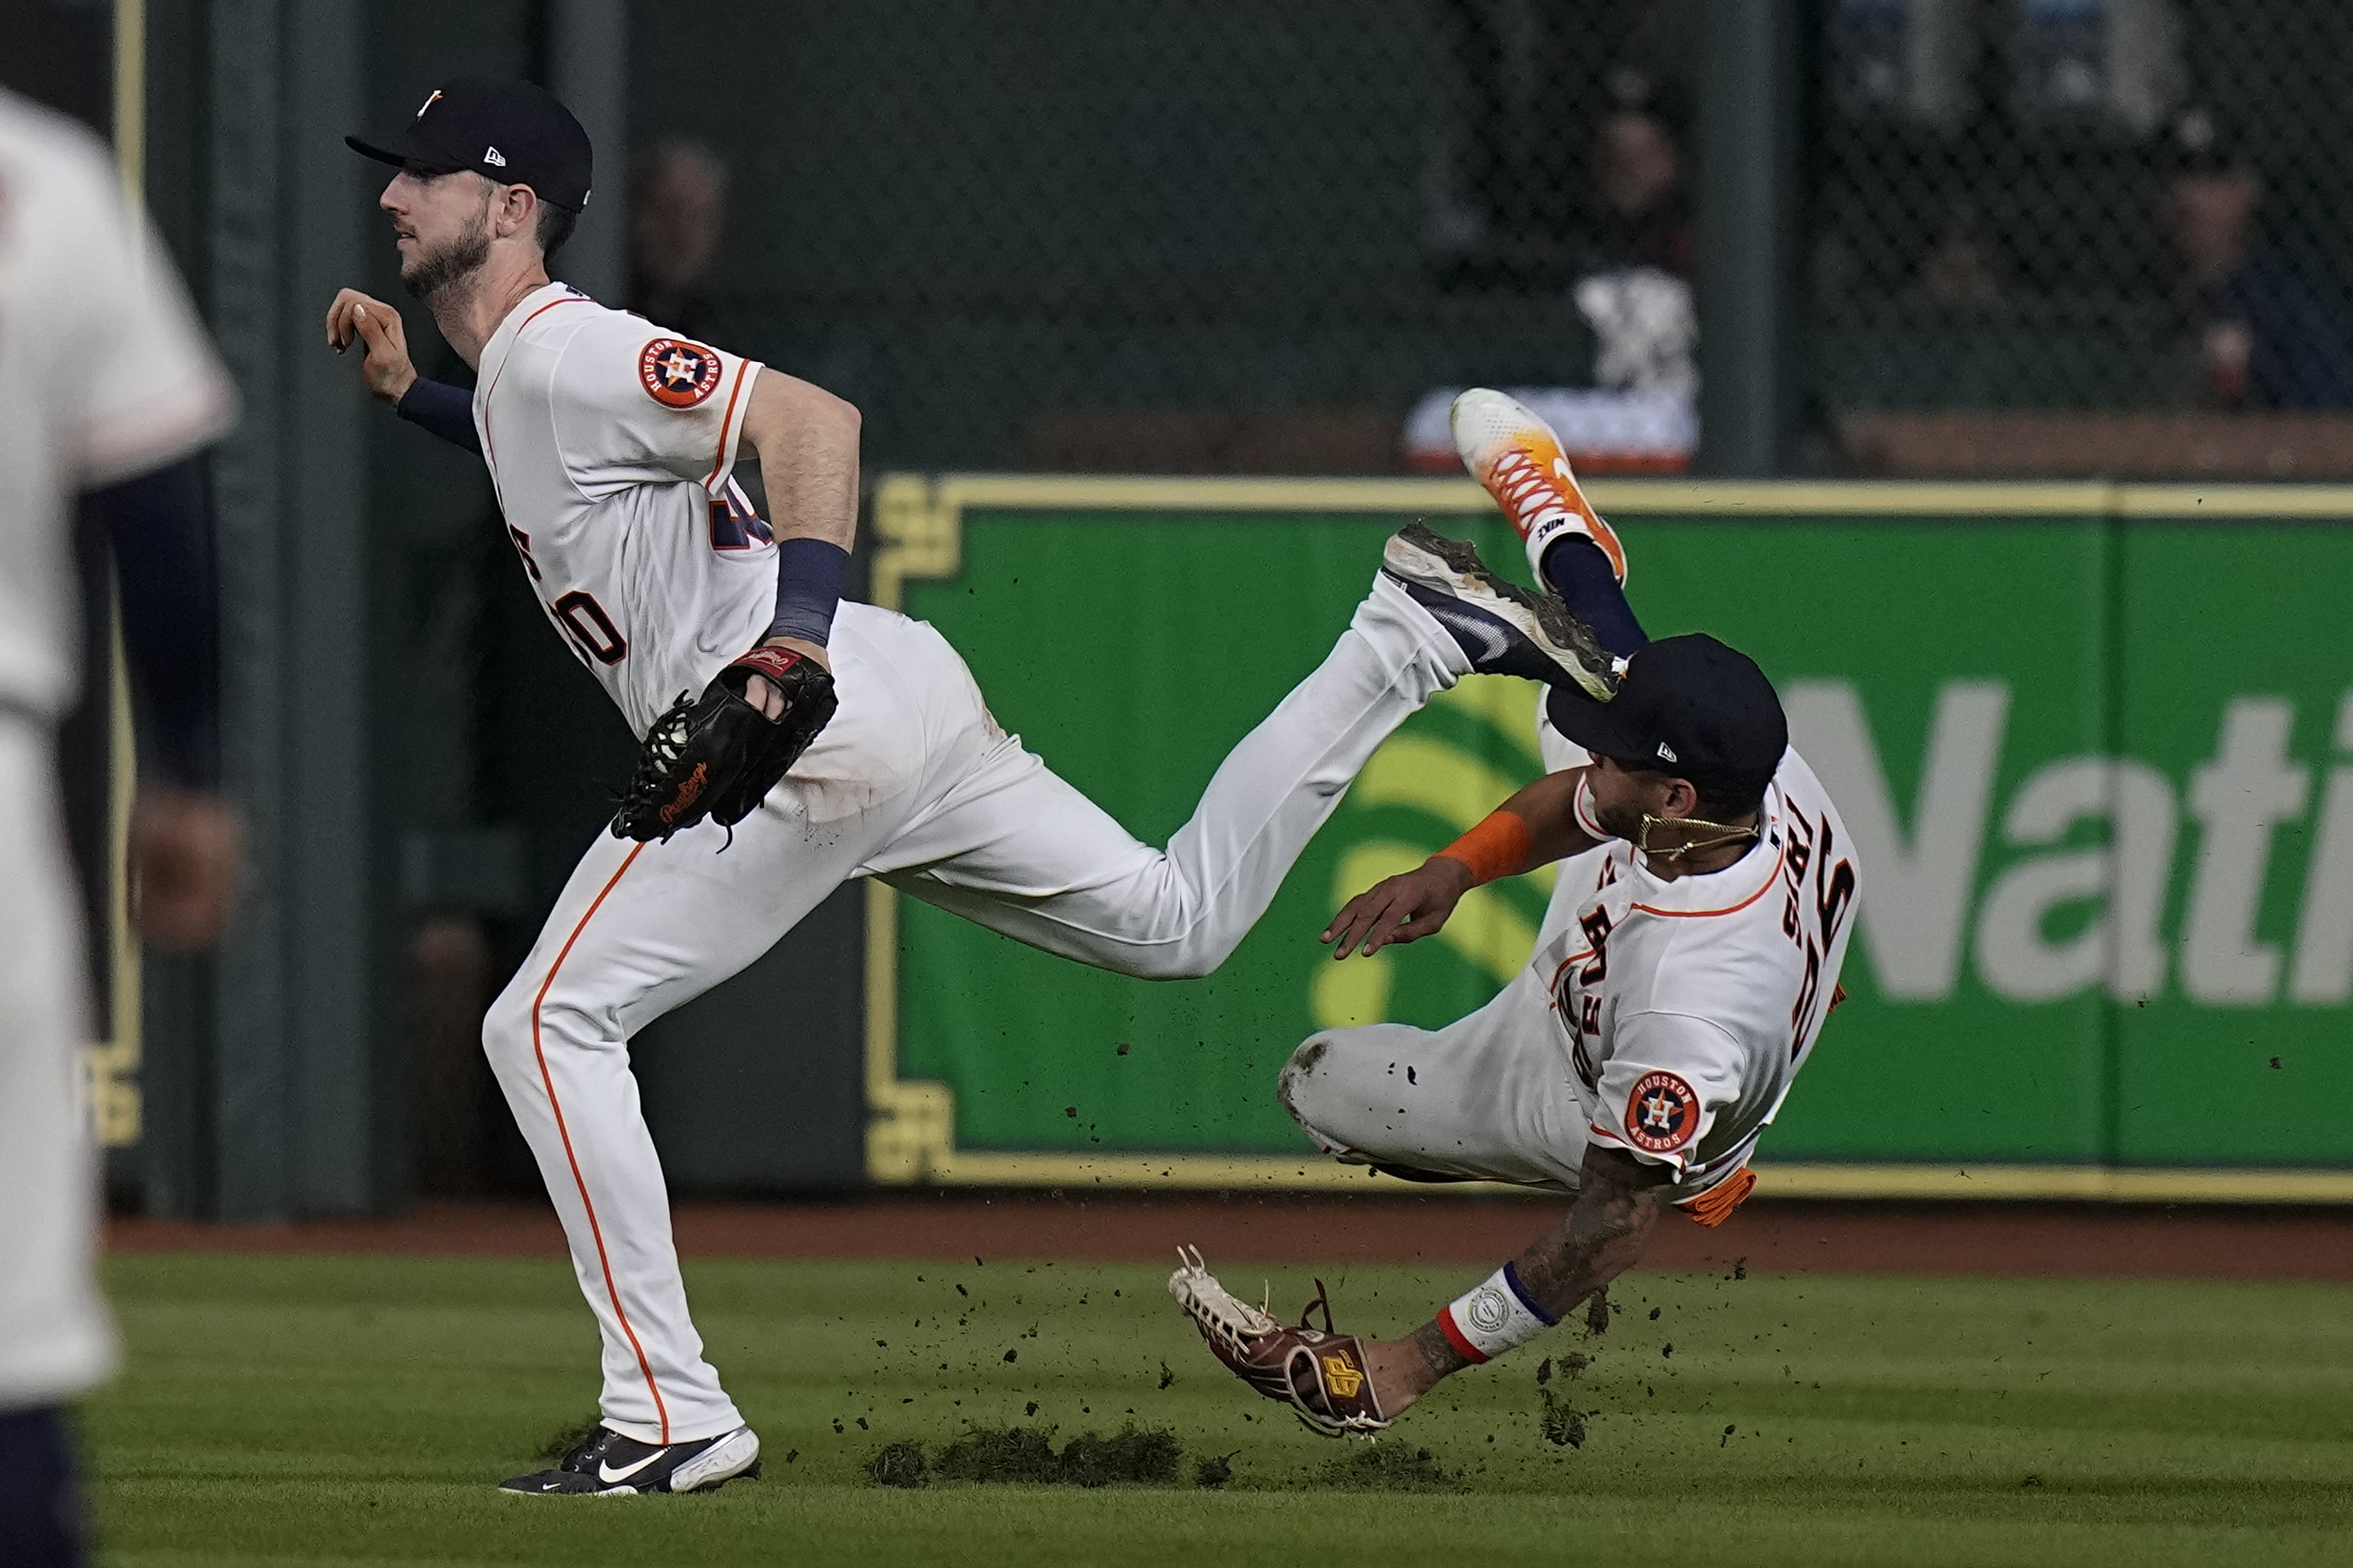 Hammerin' Braves rout Astros to win 1st WS crown since 1995